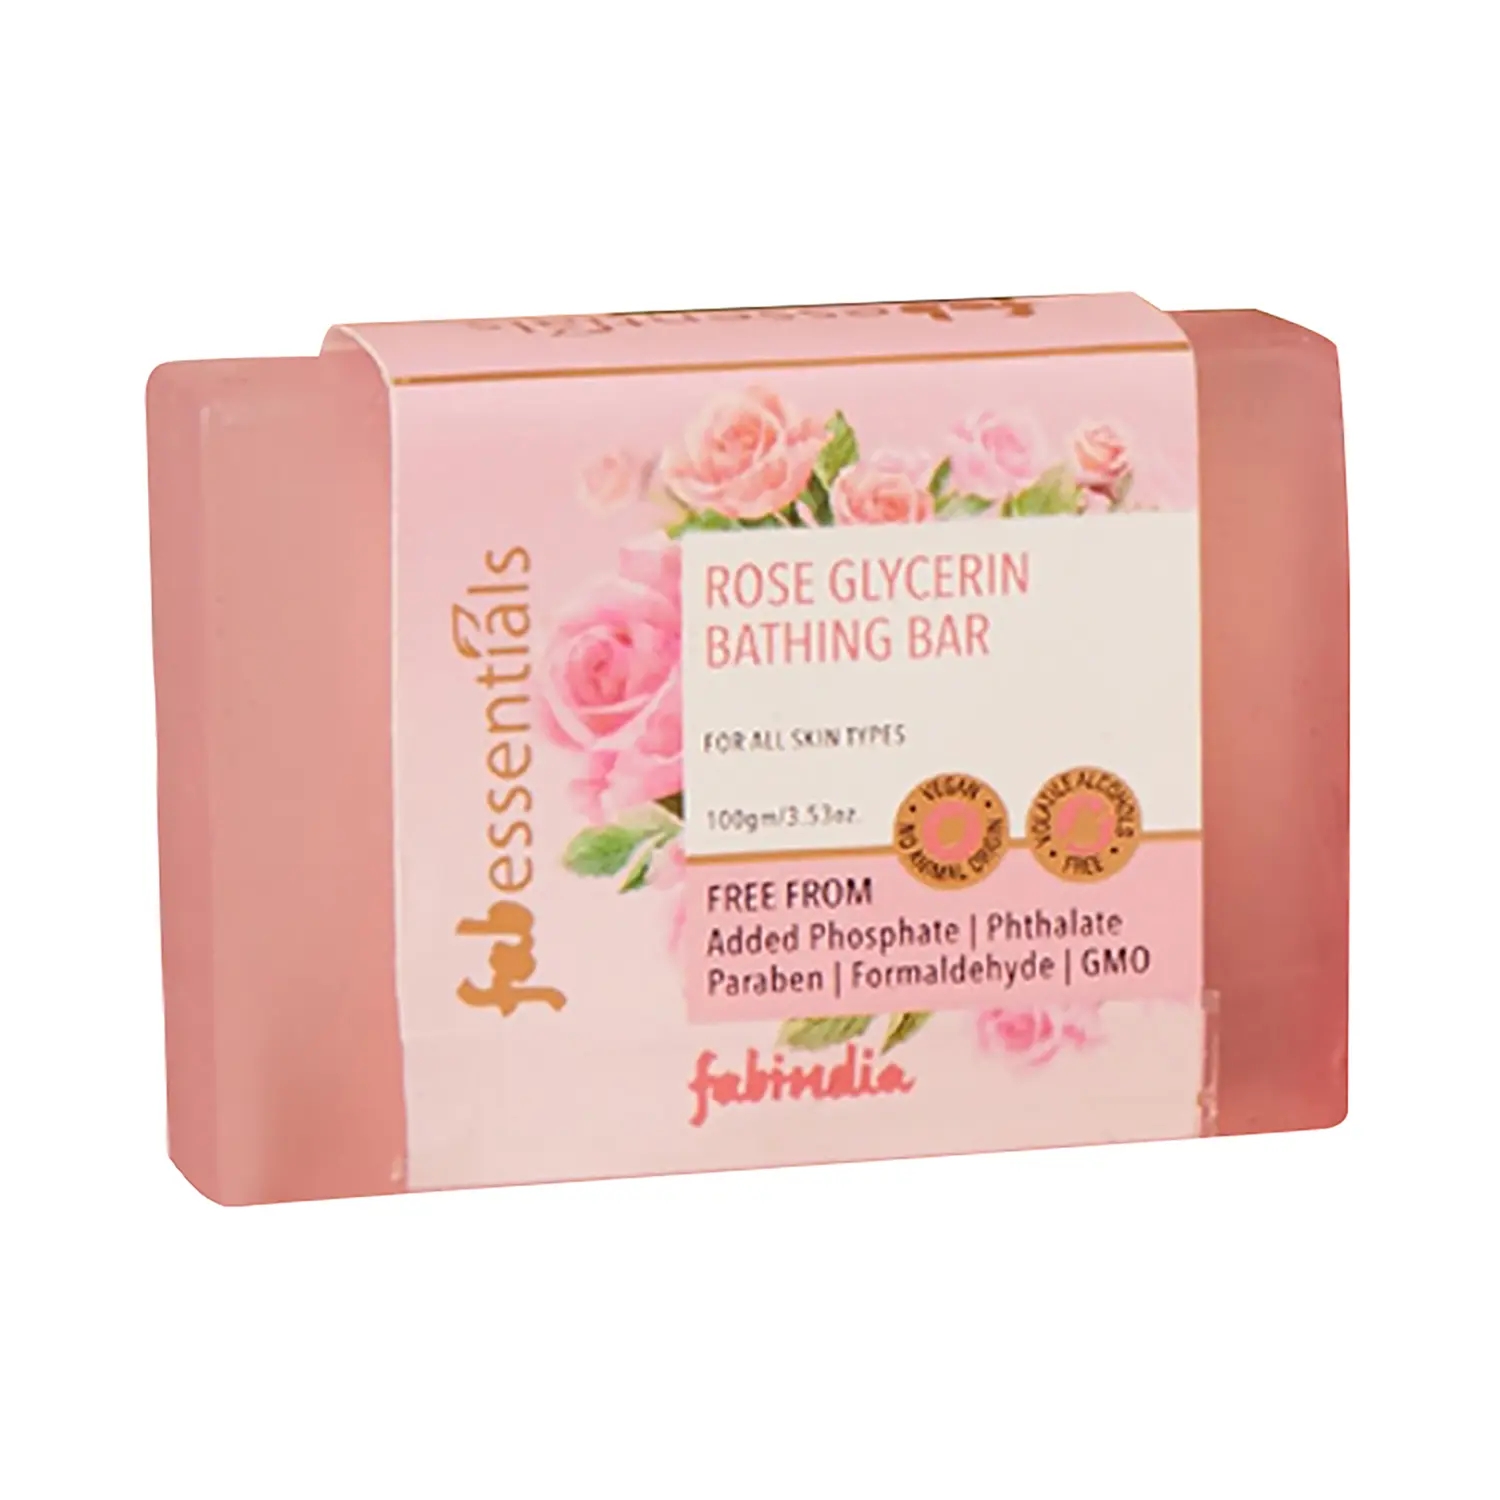 Fabessentials by Fabindia | Fabessentials by Fabindia Rose Glycerine Bathing Bar (100g)